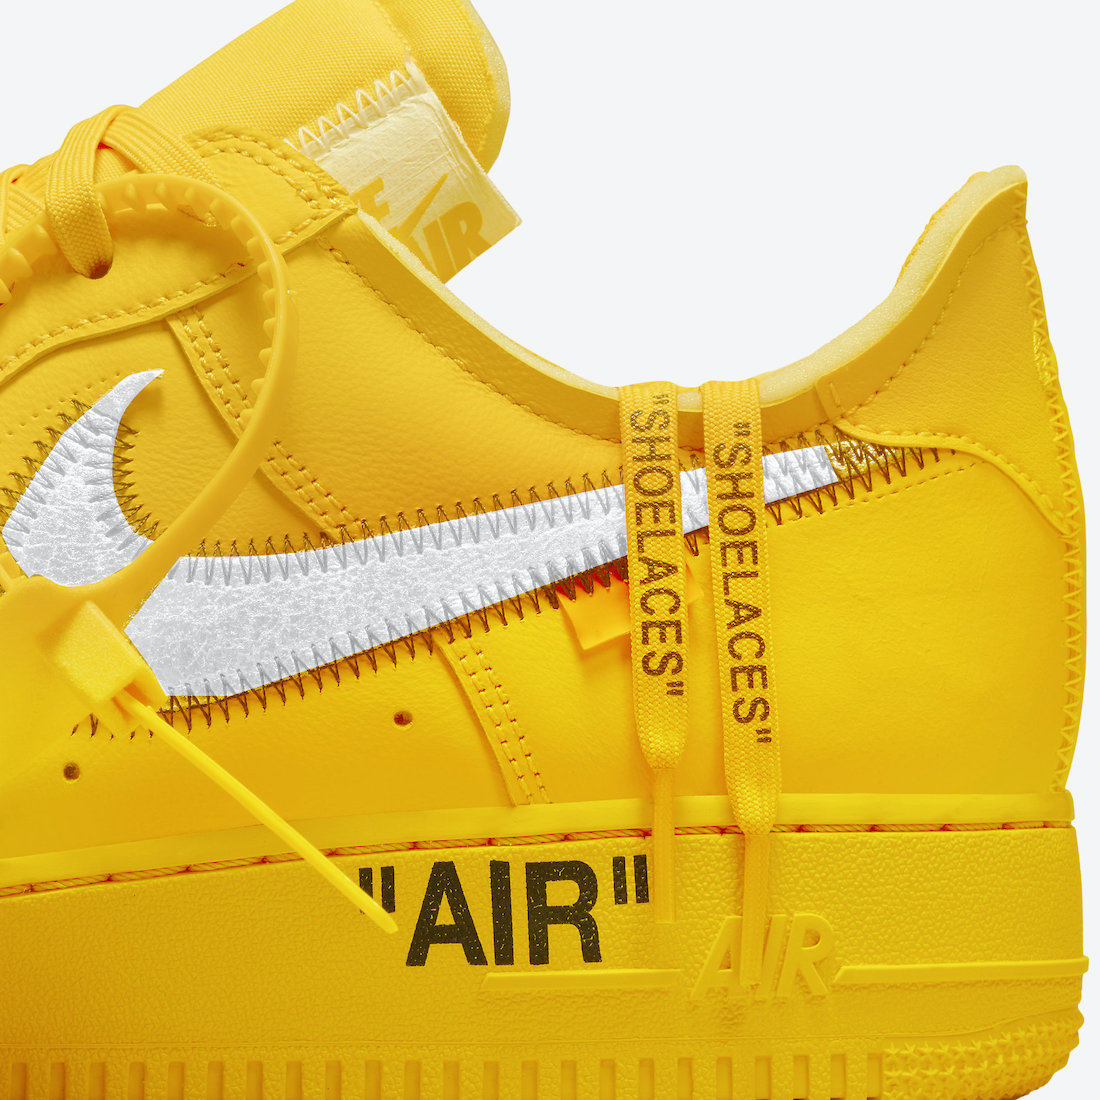 Official Look At The Off-White x Nike Air Force 1 “University Gold”